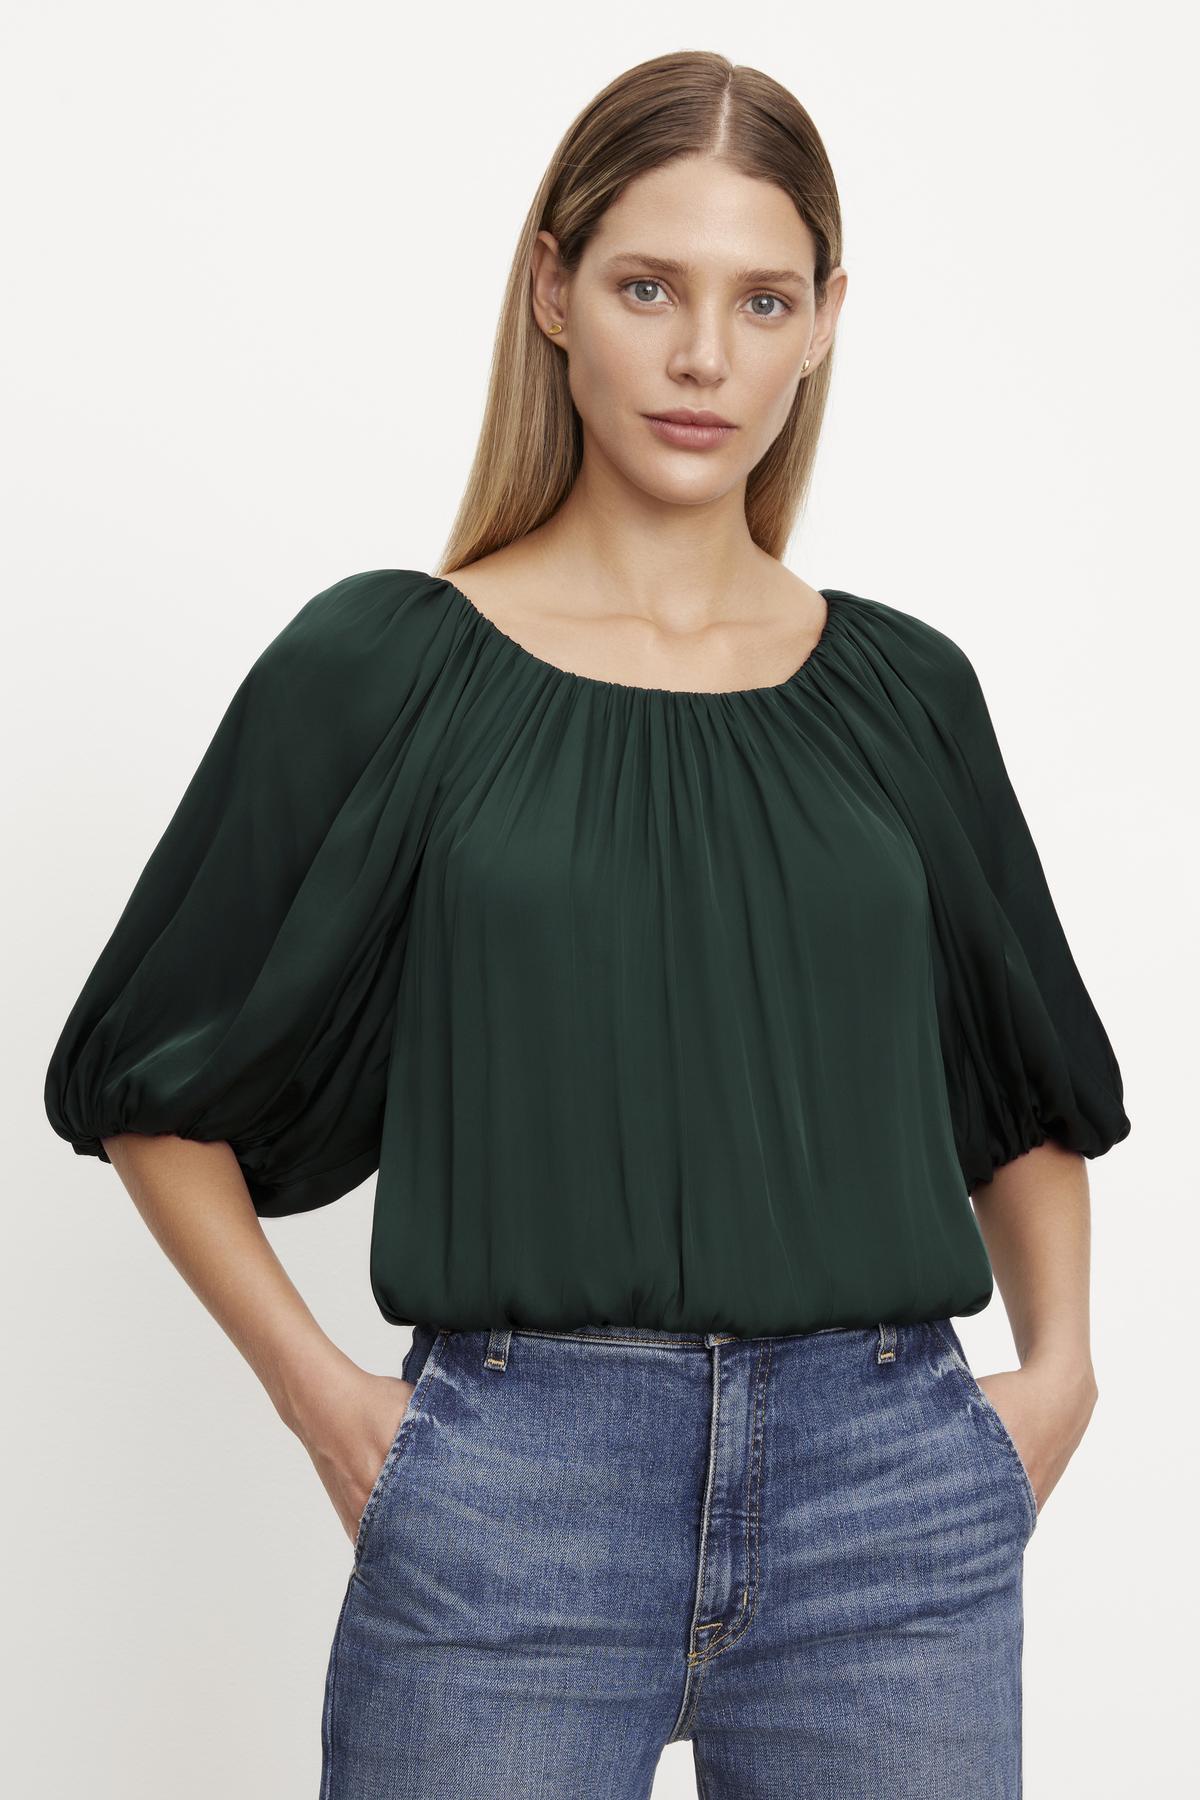   The model is wearing a green cropped TAMI SATIN PUFF SLEEVE TOP by Velvet by Graham & Spencer. 